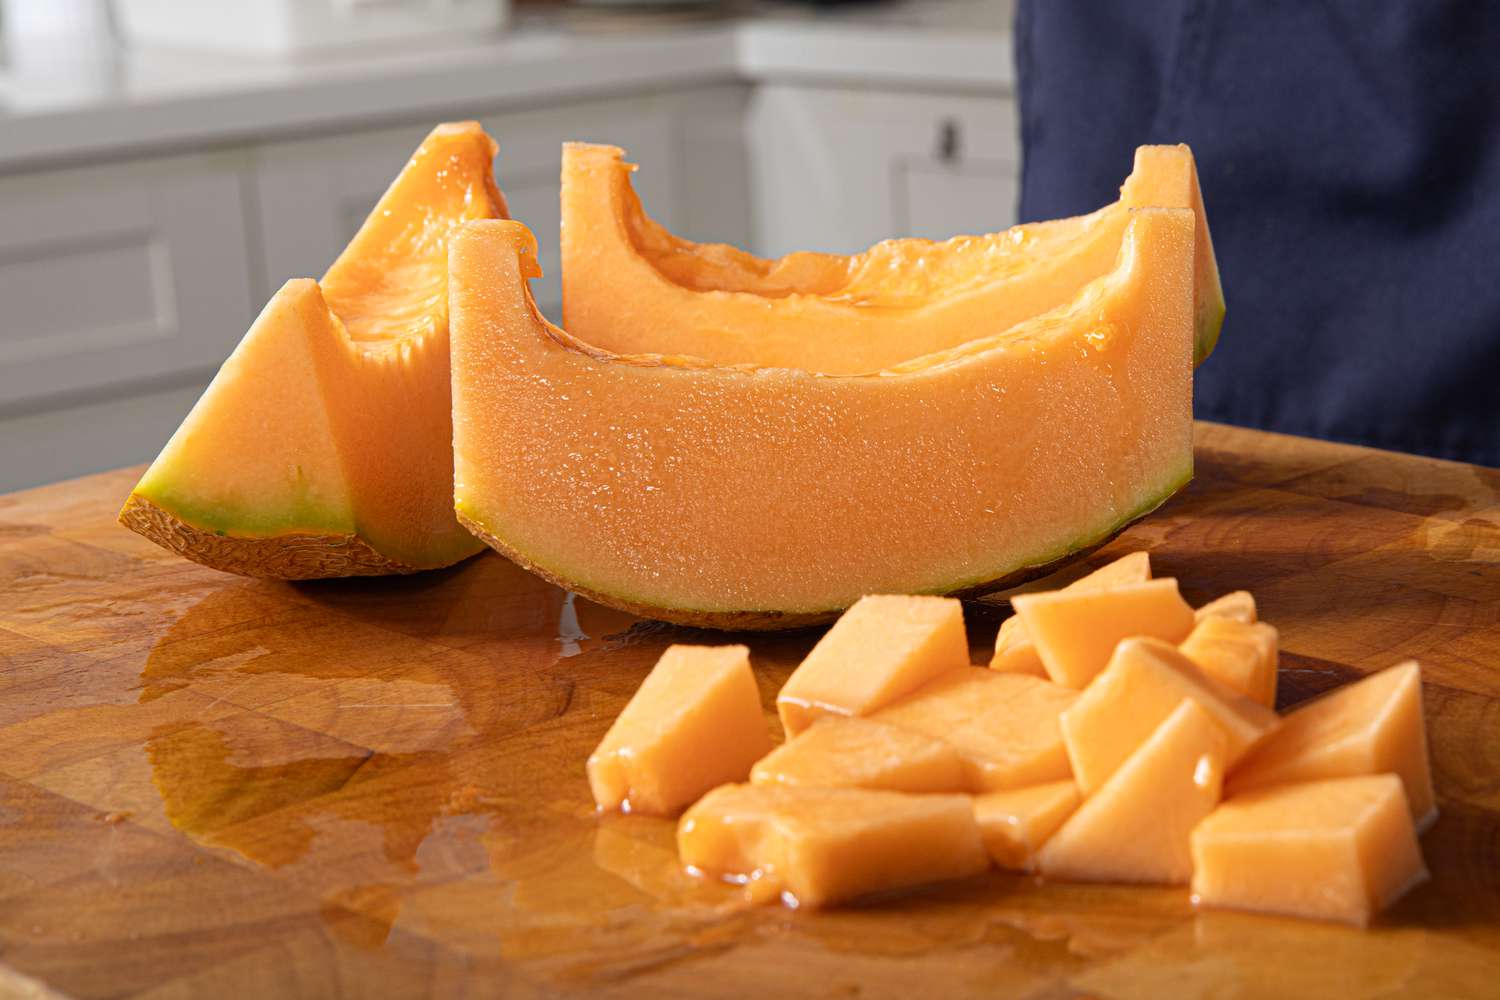 The Foolproof Trick To Determine A Ripe And Sweet Cantaloupe Without Wasting A Single Slice!